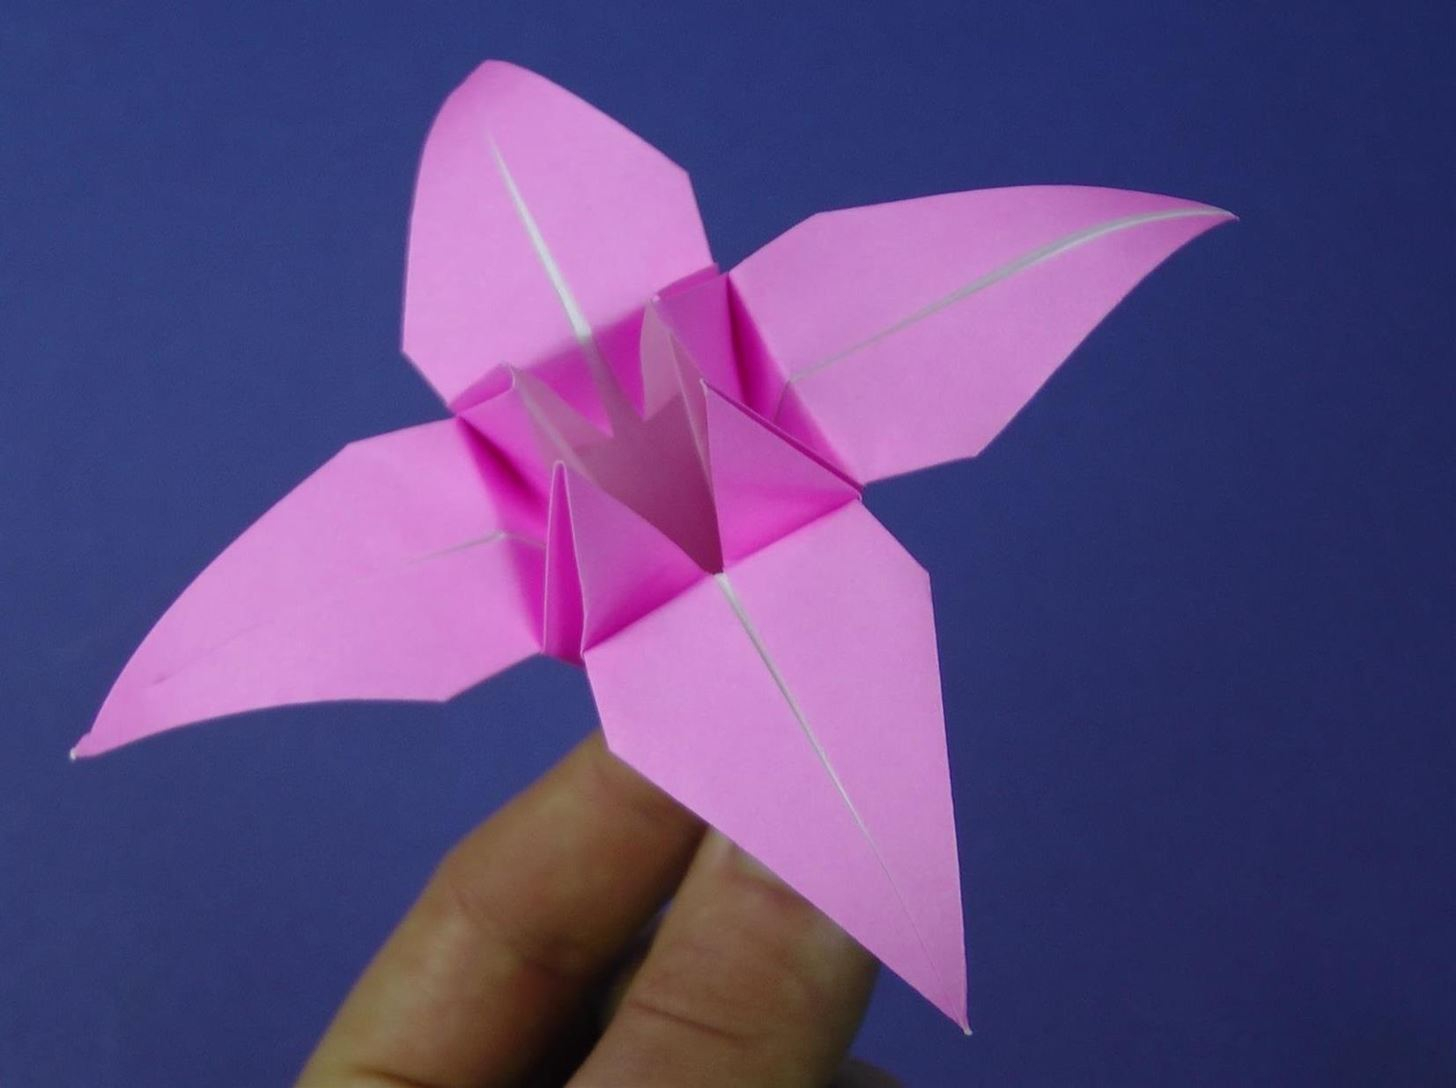 How Do You Make An Origami How To Make An Origami Lily Flower Origami Wonderhowto